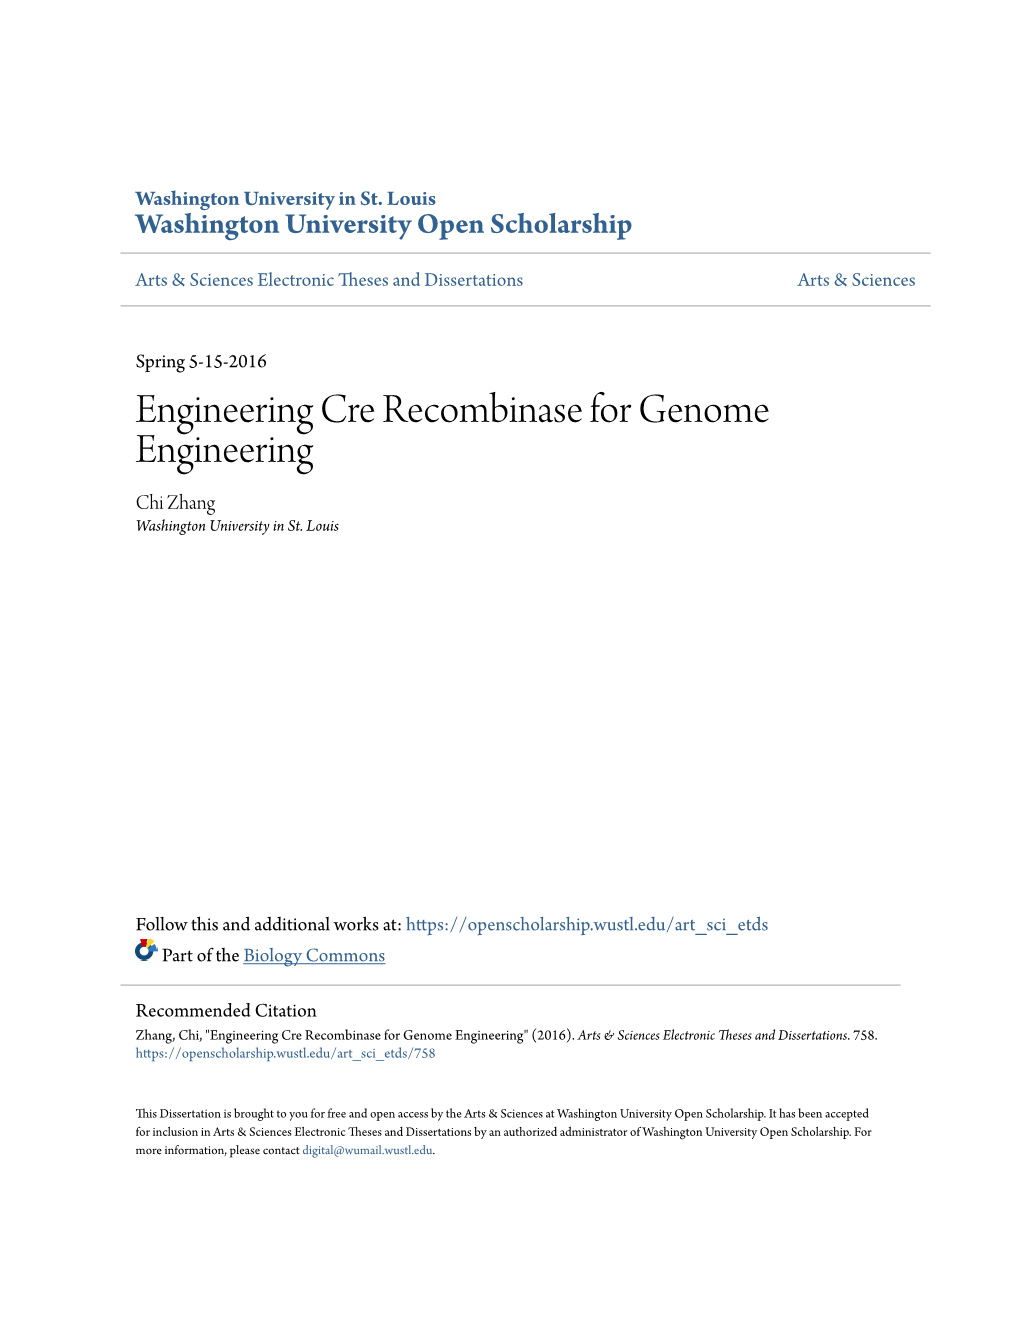 Engineering Cre Recombinase for Genome Engineering Chi Zhang Washington University in St